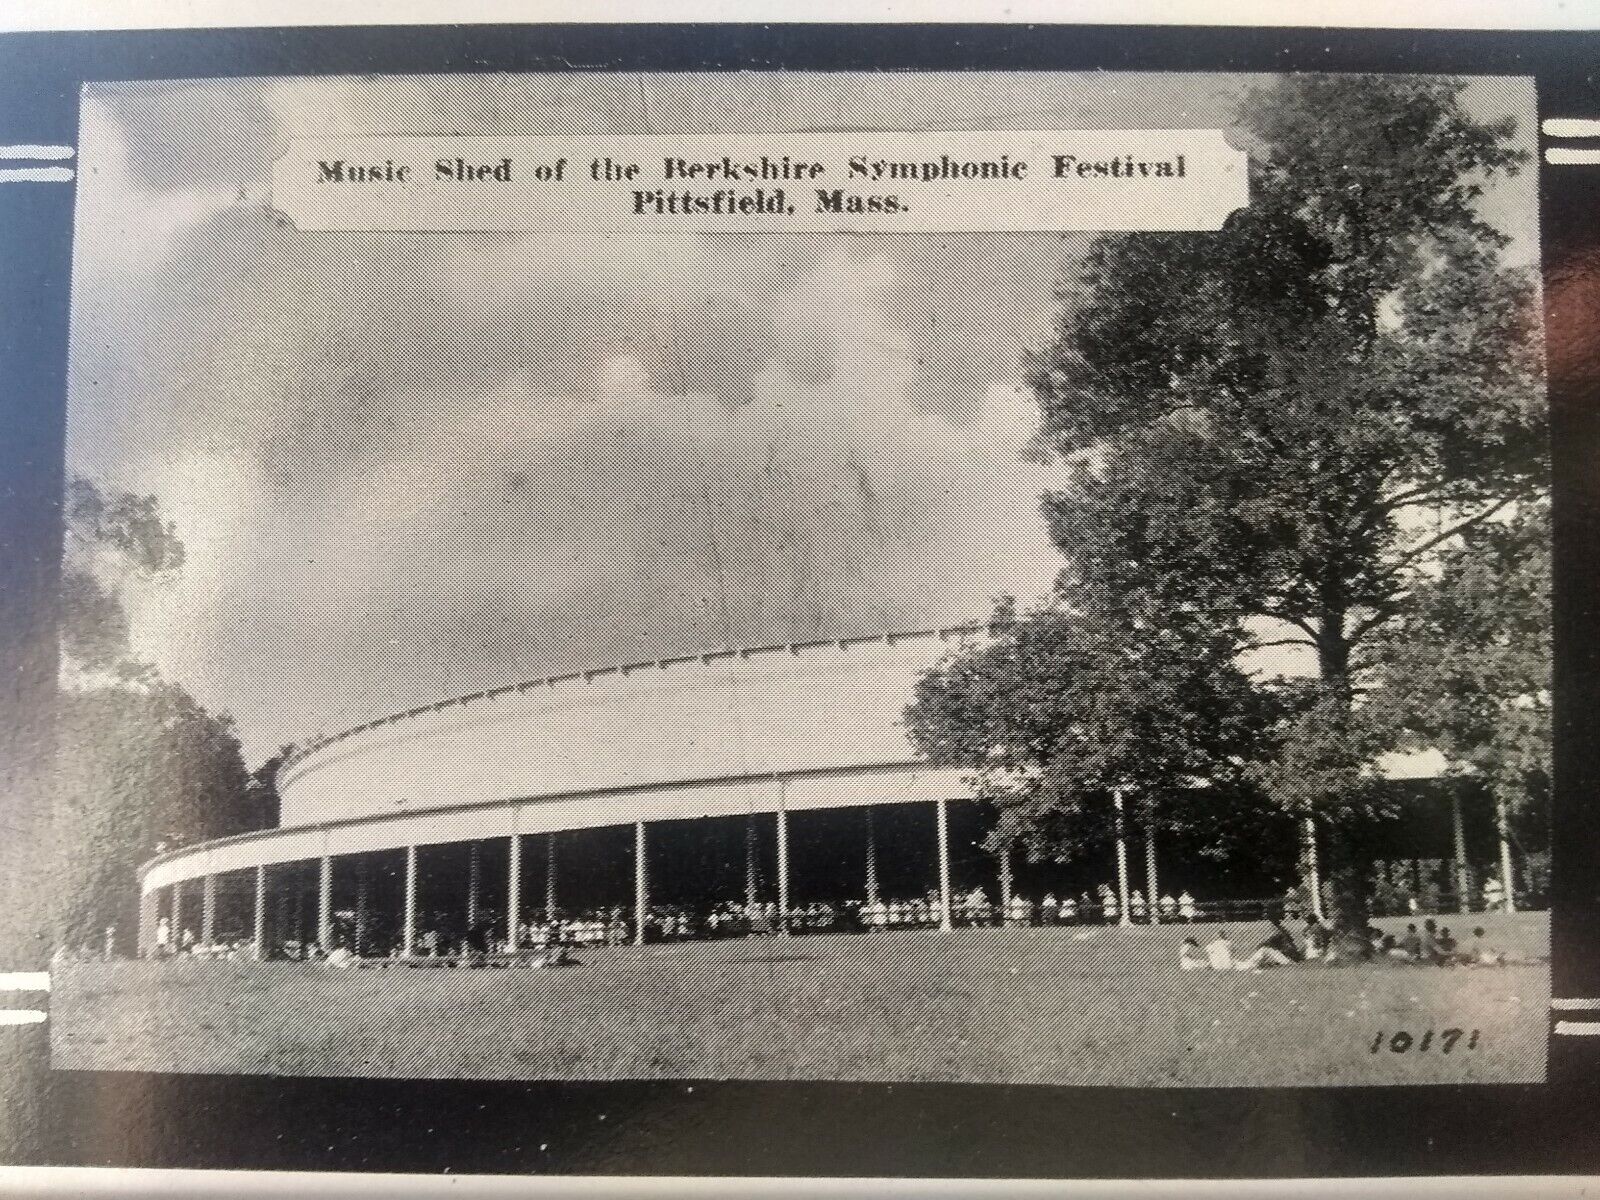 Vintage Postcard, music shed of the Berkshire symphonic festival Pittsfield Mass